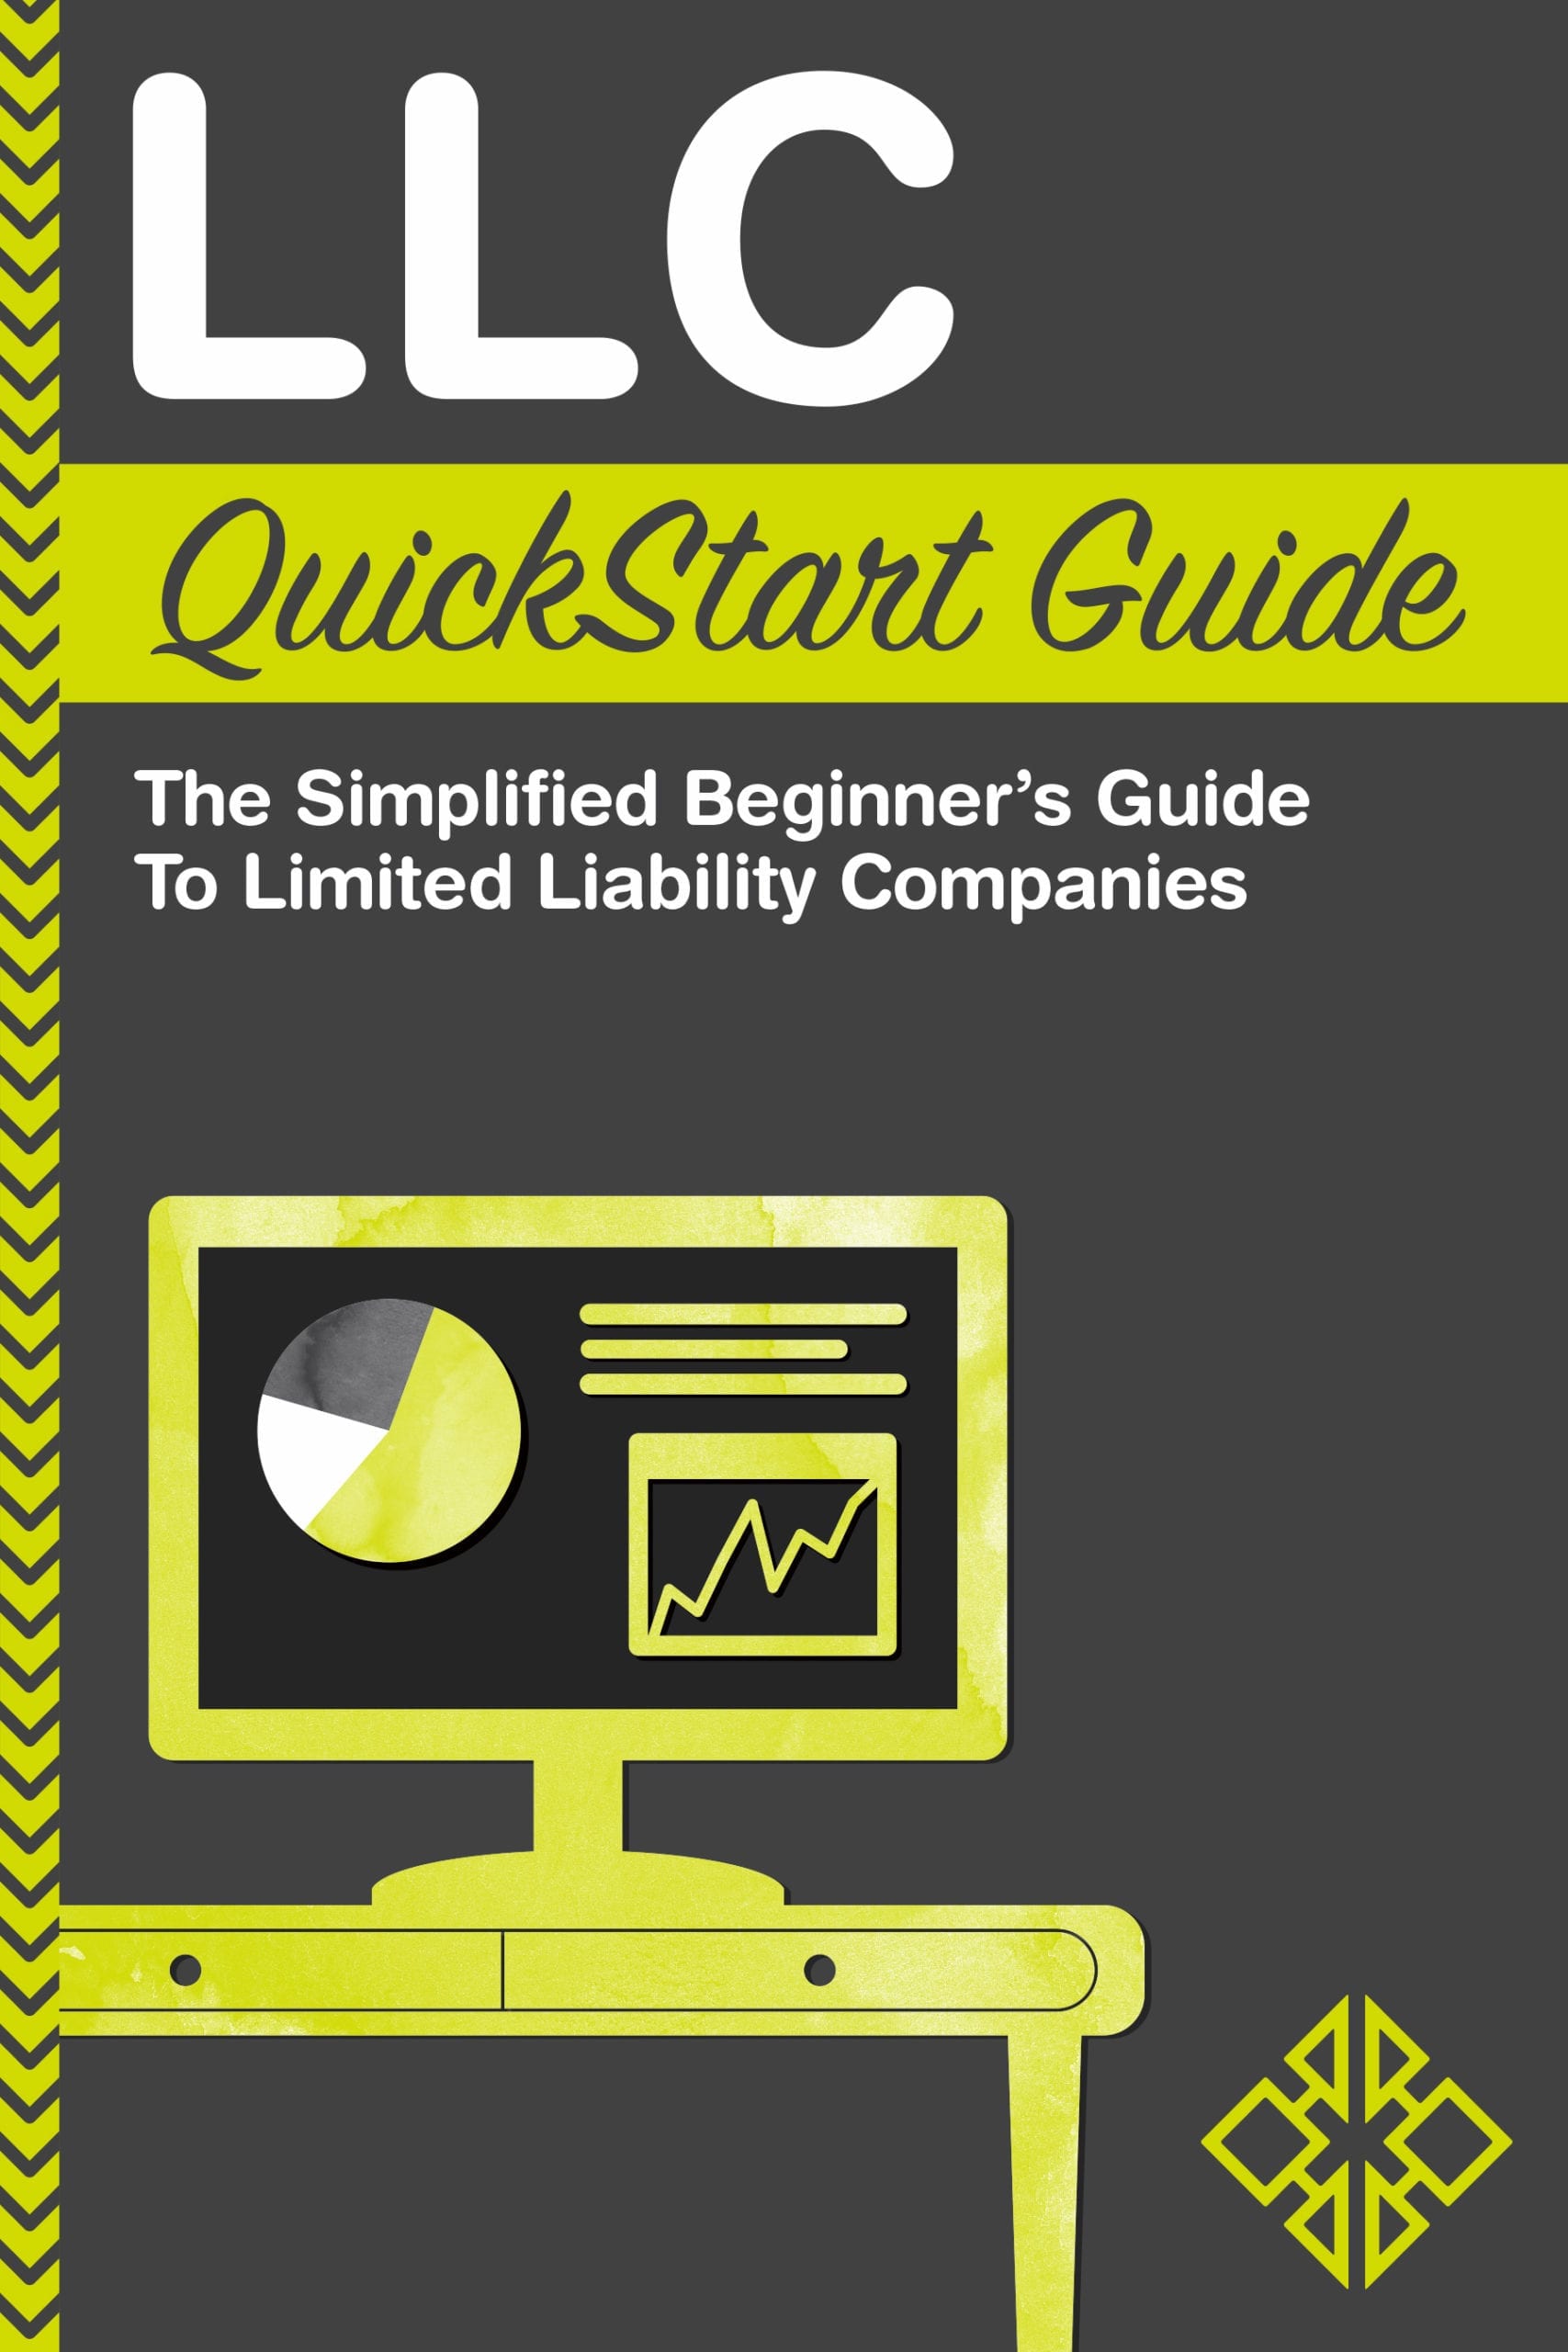 LLC QuickStart Guide - Available Now Via Publisher ClydeBank Media